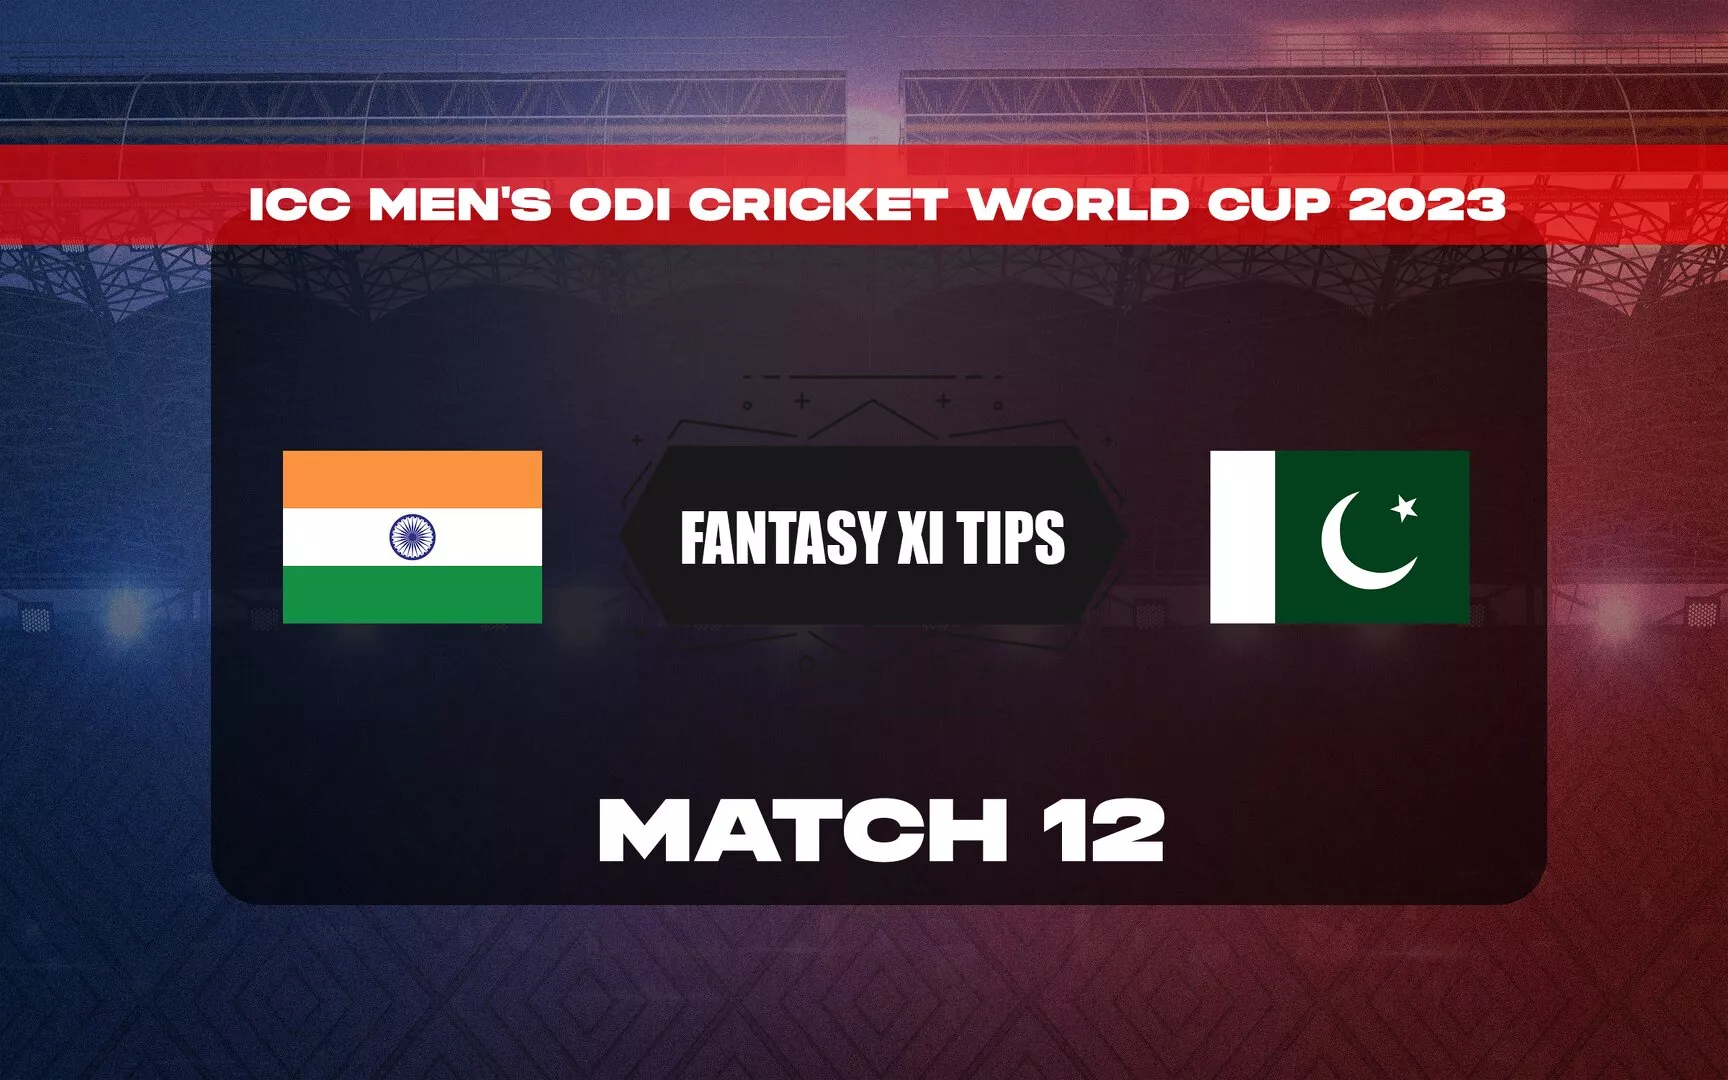 IND vs PAK Dream11 Prediction, Dream11 Playing XI, Today Match 12, ICC Men's ODI Cricket World Cup 2023